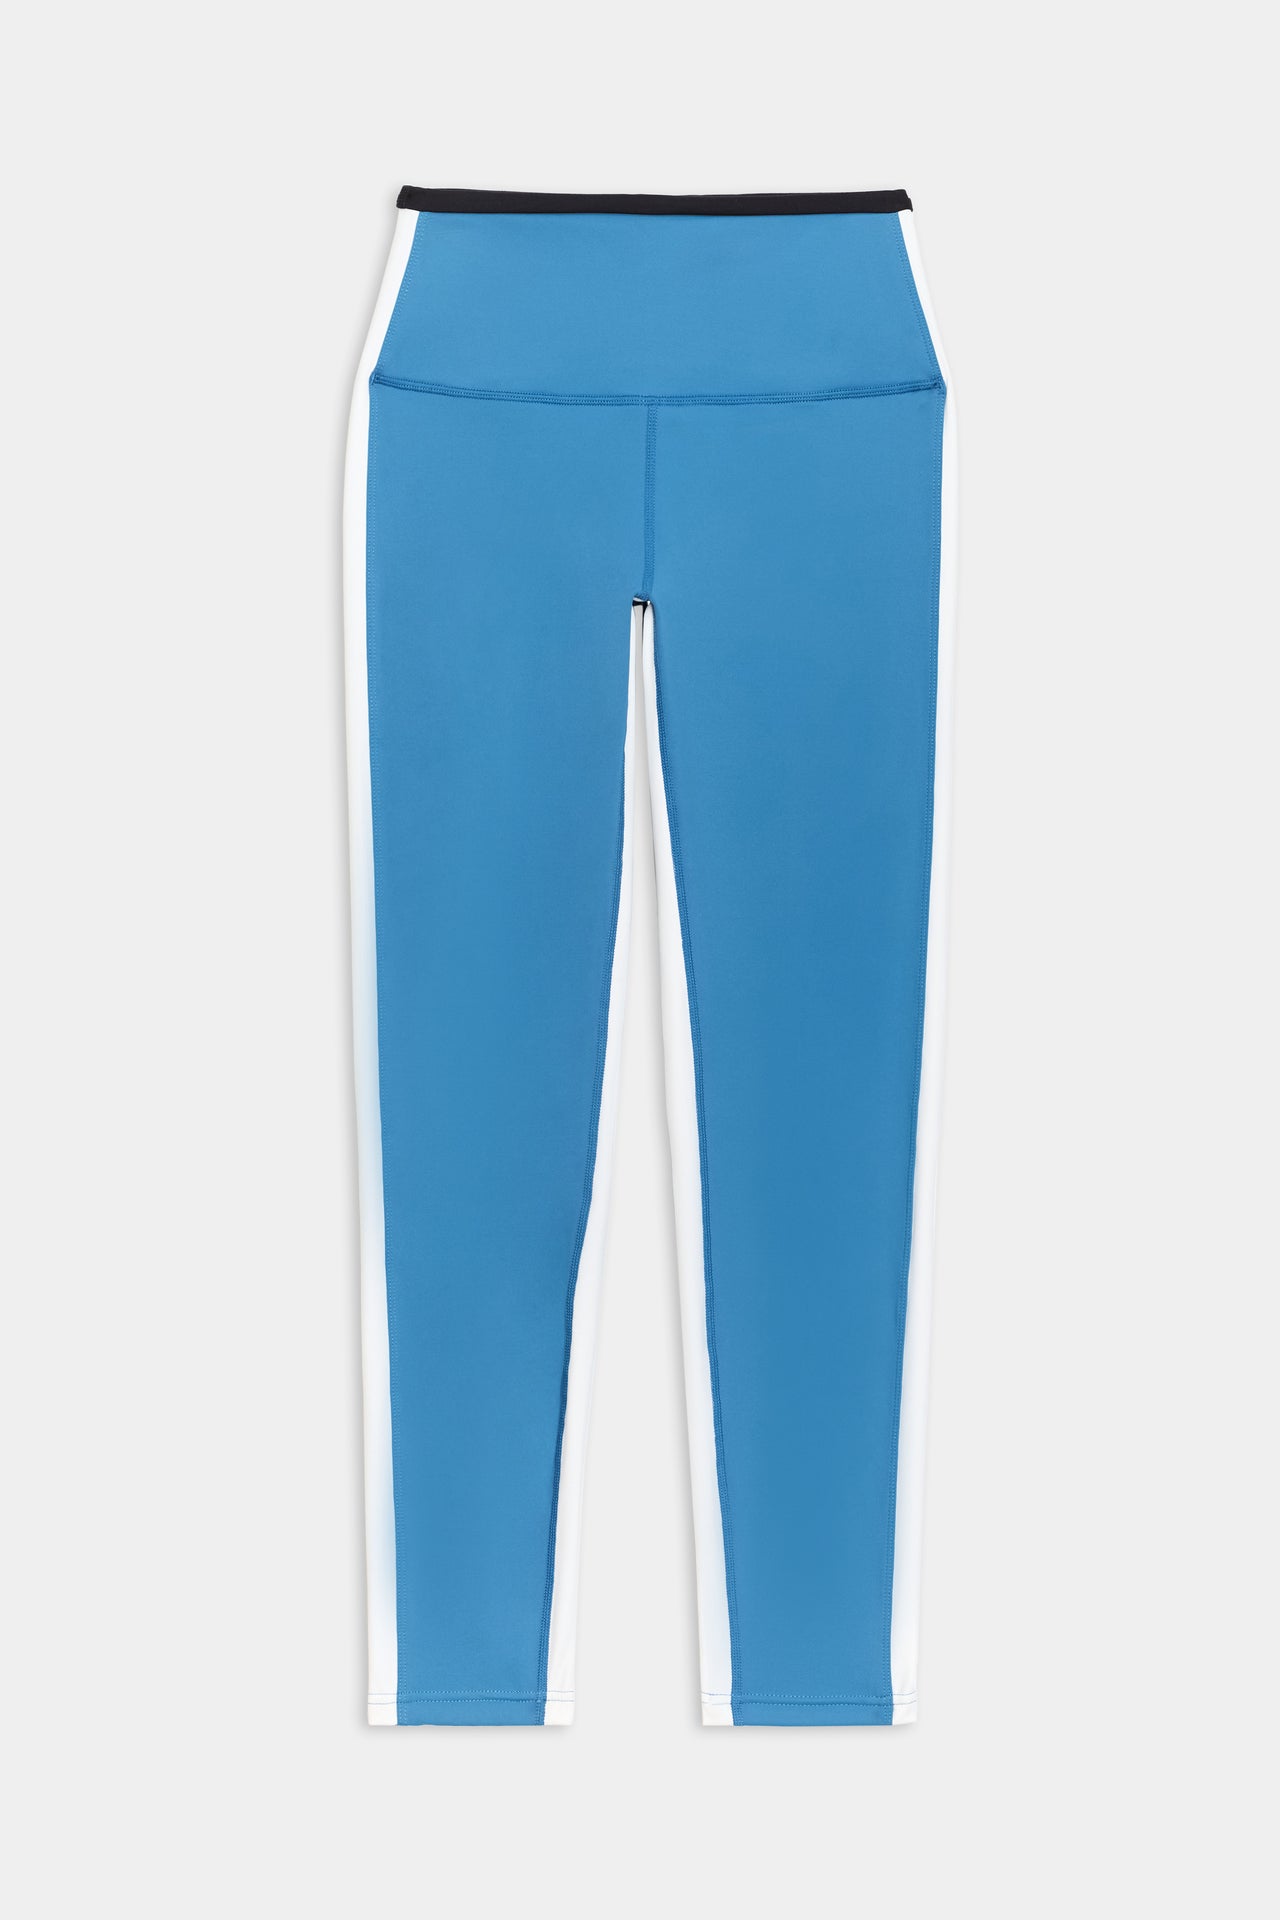 Front flat view of bright blue leggings with white side stripes and black waistband 